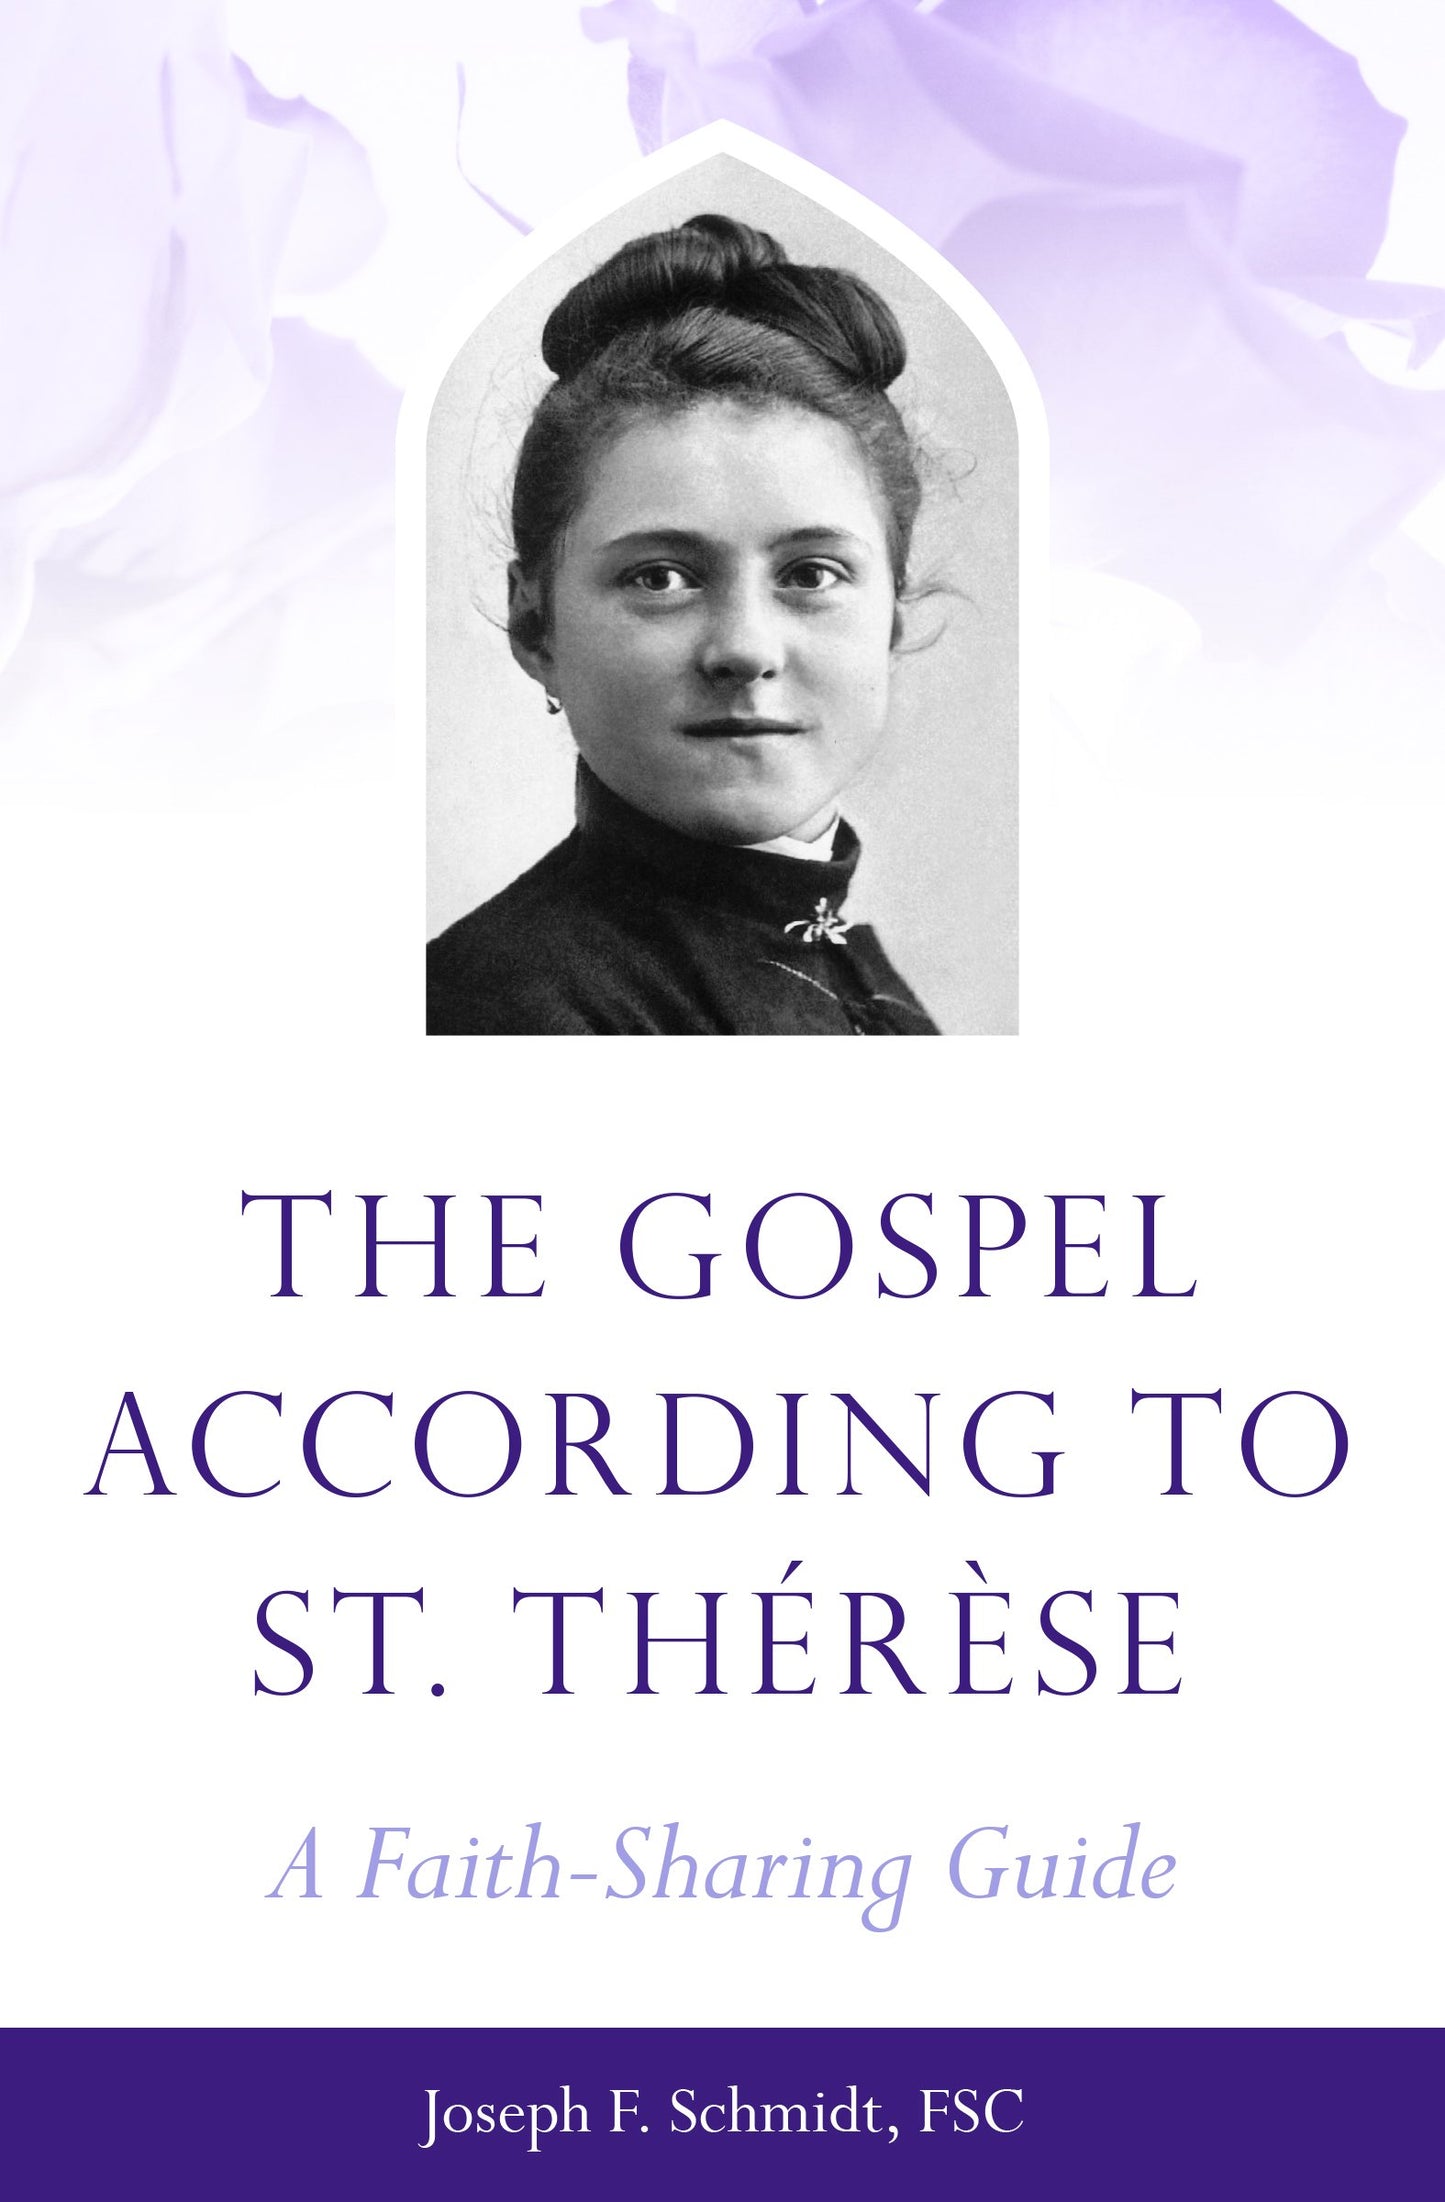 Gospel According to St. Therese: A Faith-Sharing Guide